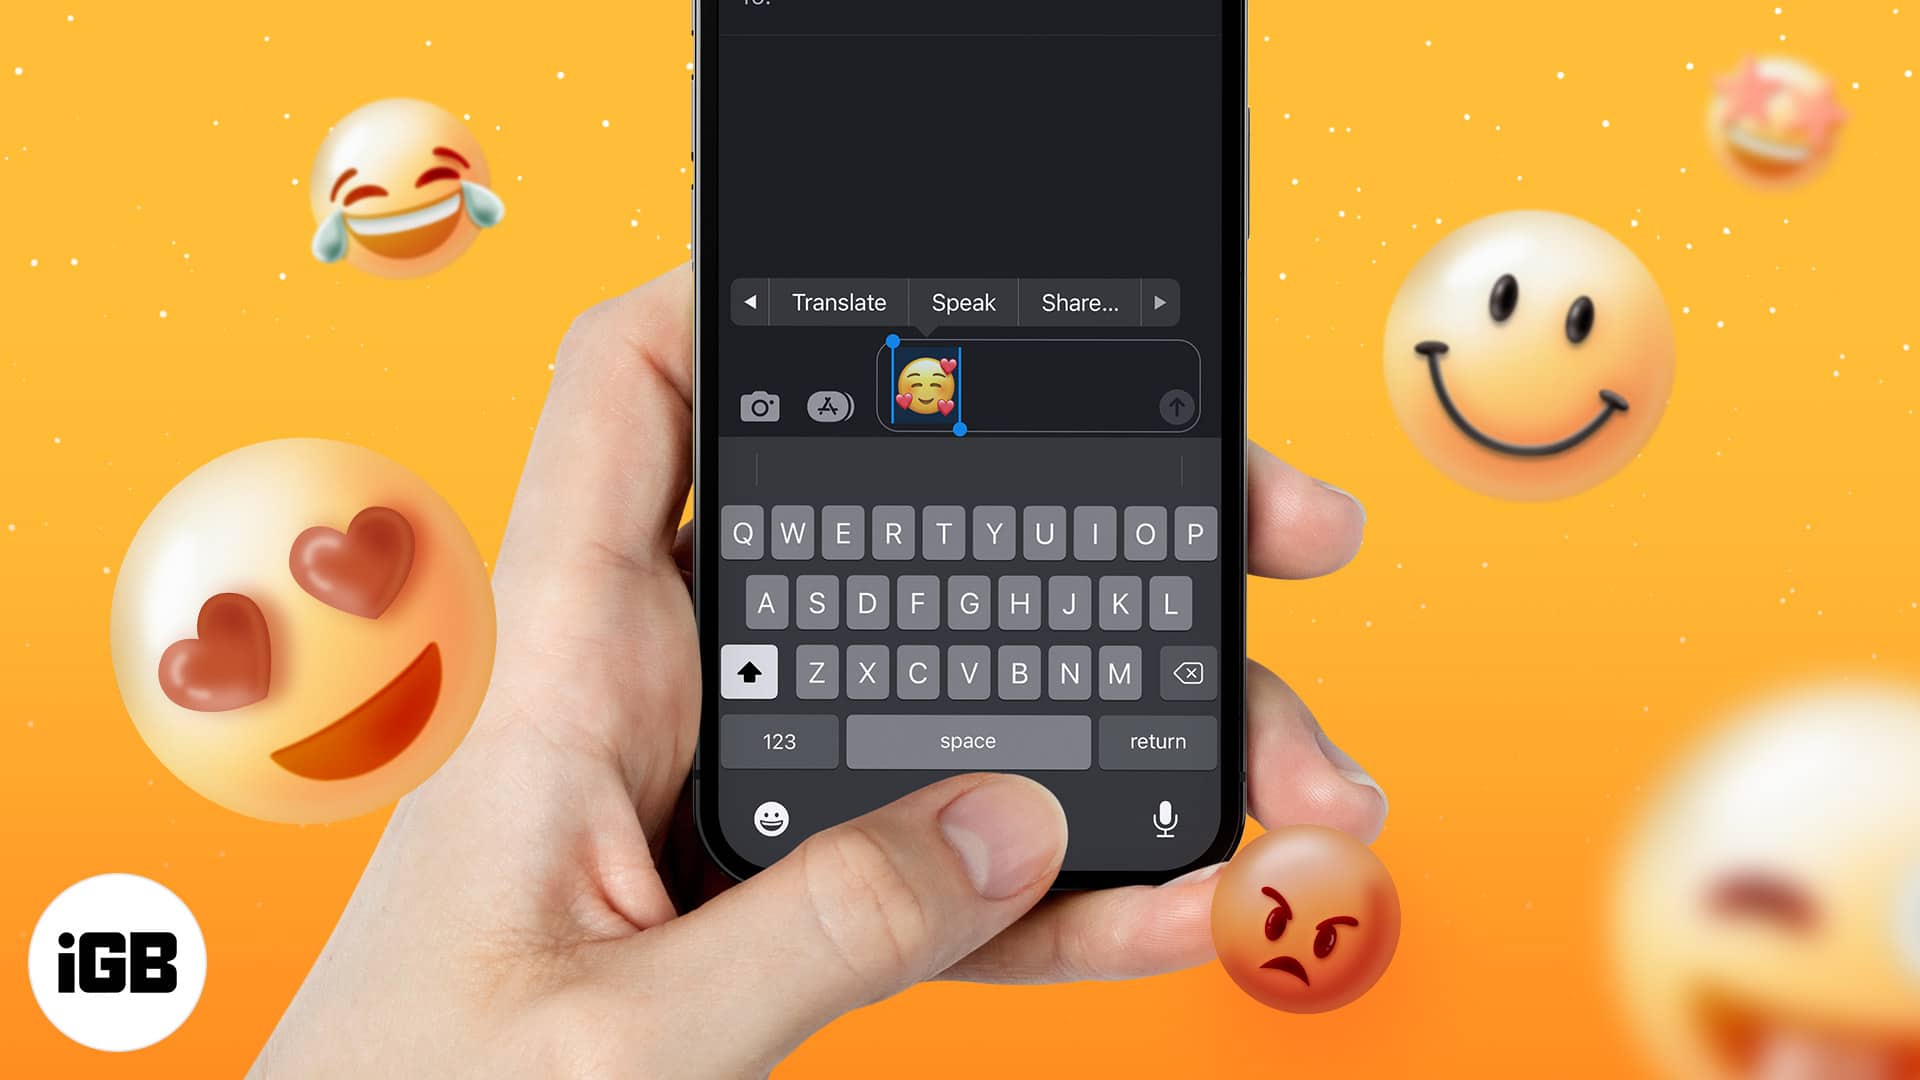 How to find the meaning of emojis on your iphone